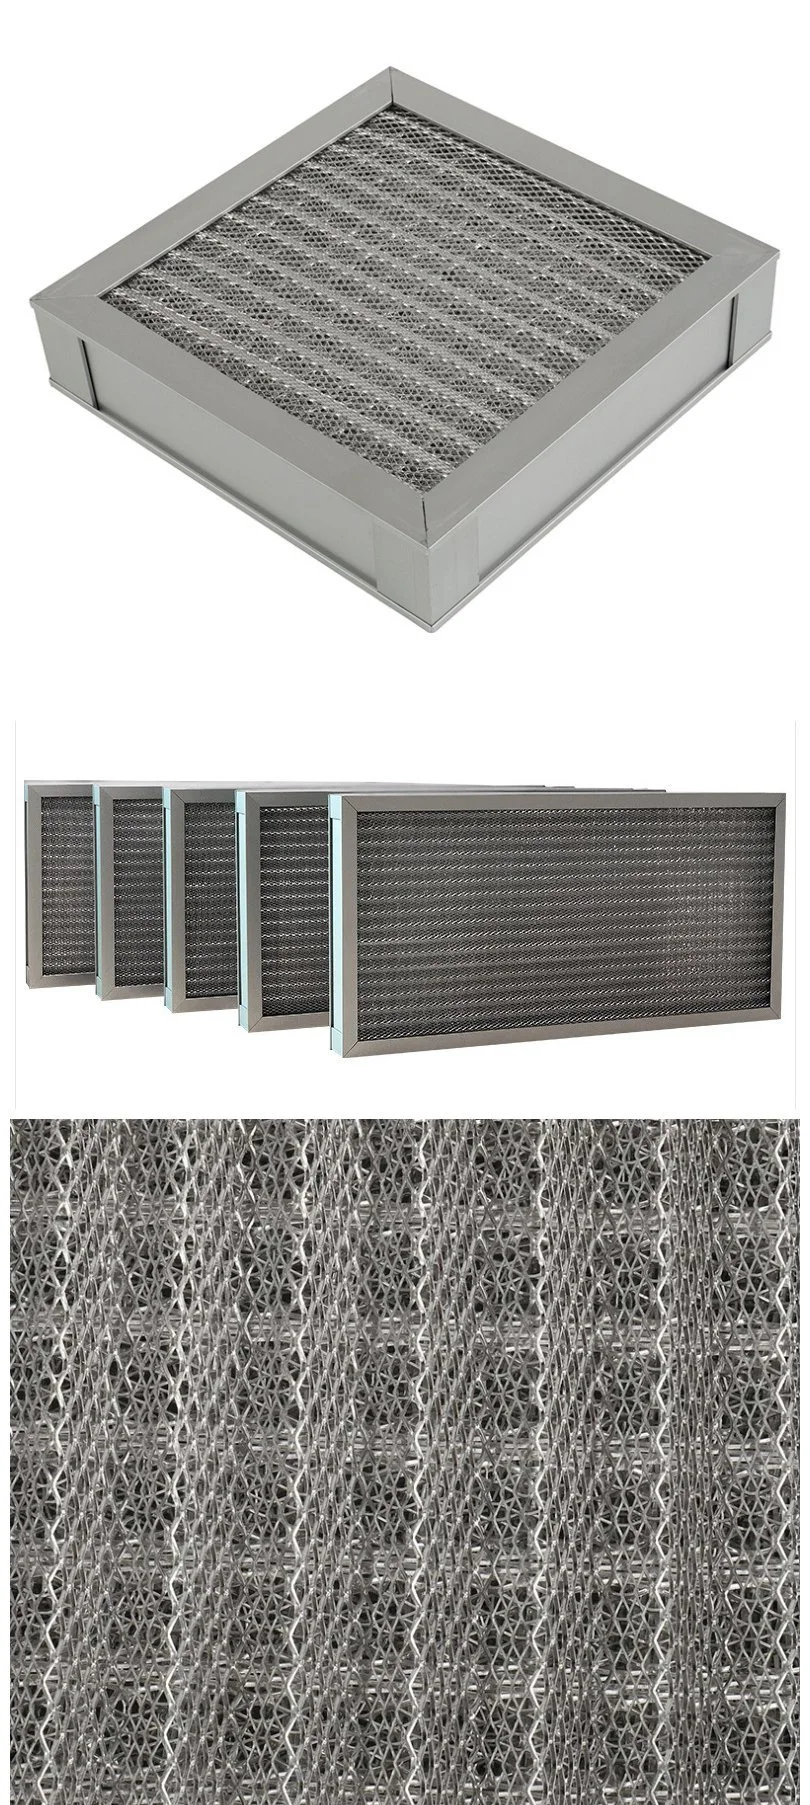 Washable Multilayer Aluminum Mesh Pleat Air Filter for Ventilation System